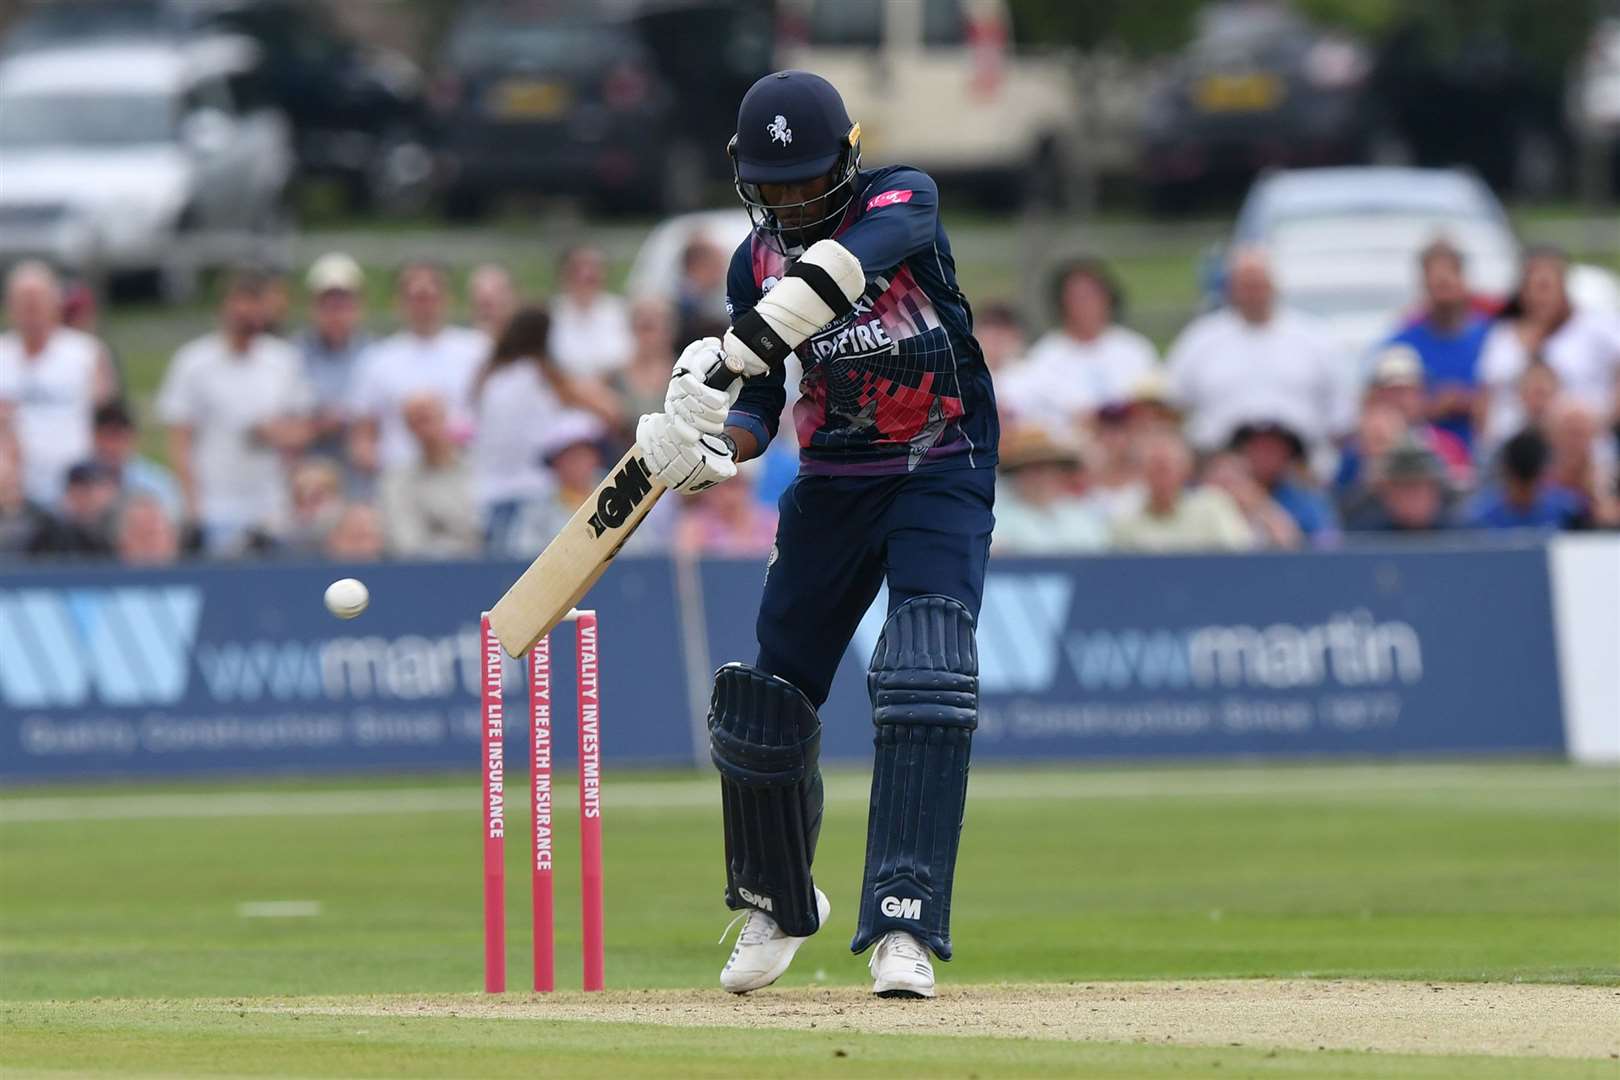 Kent will play Suffolk at the County Ground, Beckenham in July